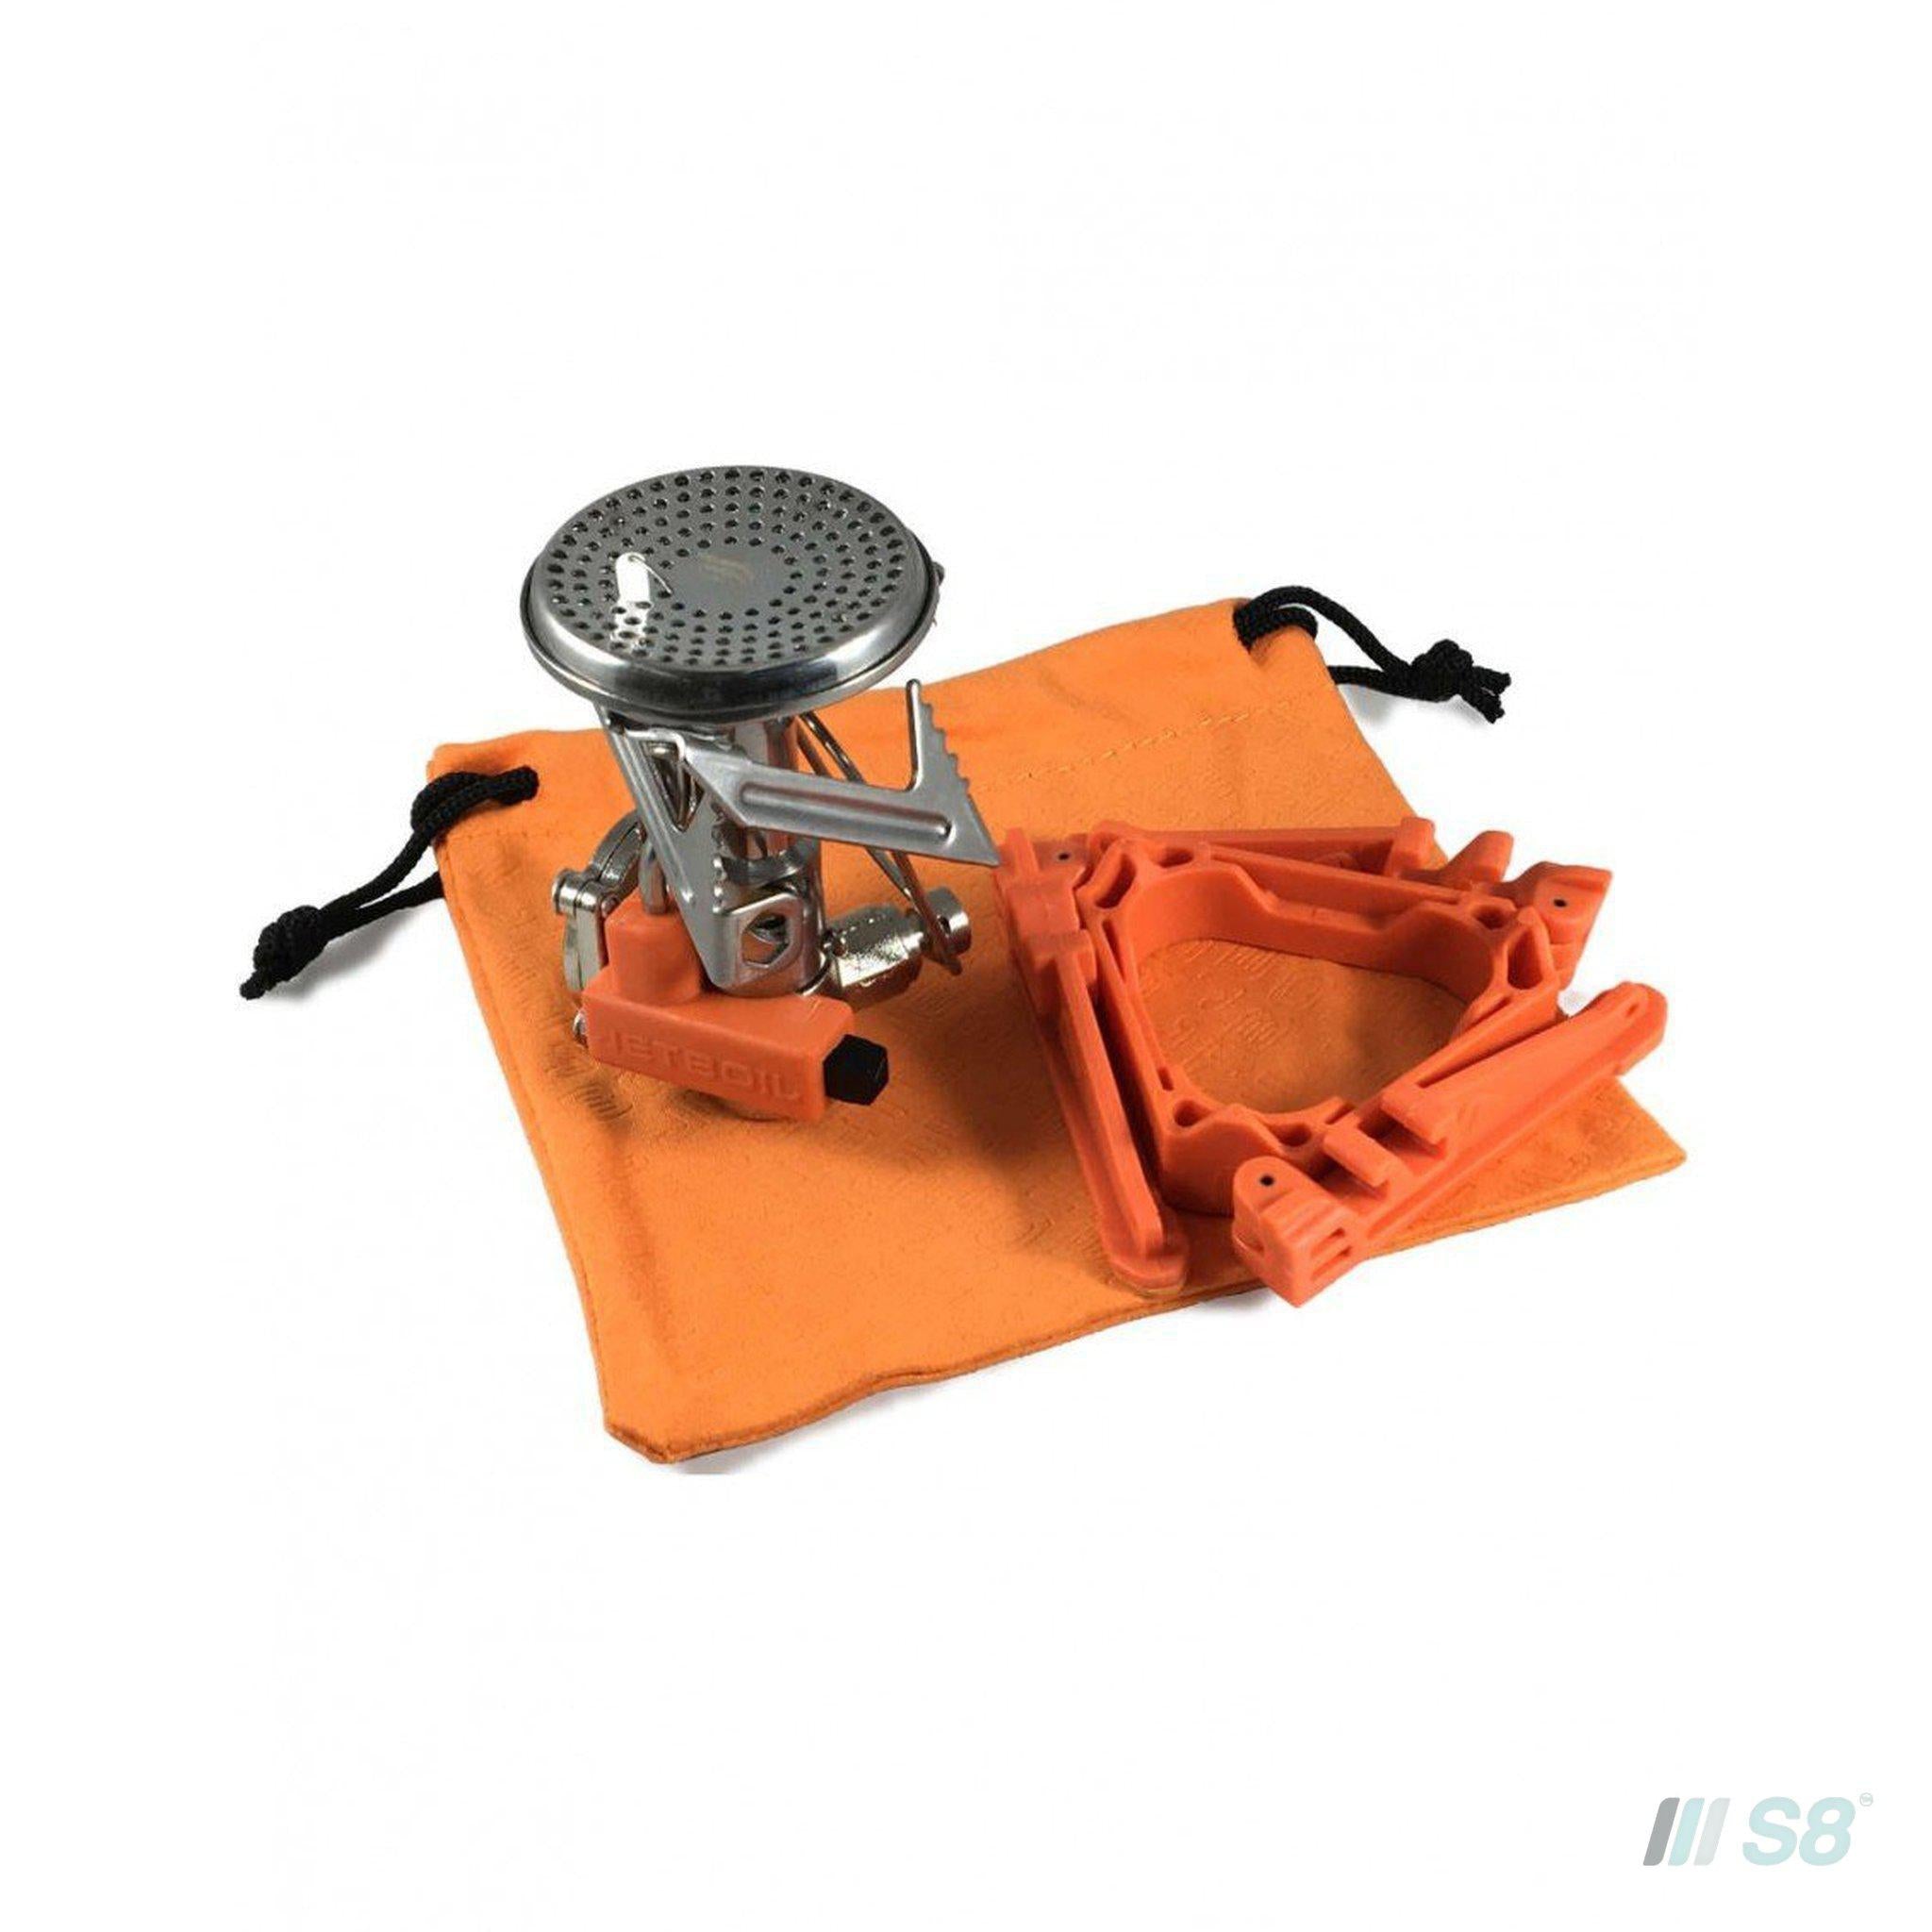 Jetboil MightyMo-jetboil-S8 Products Group